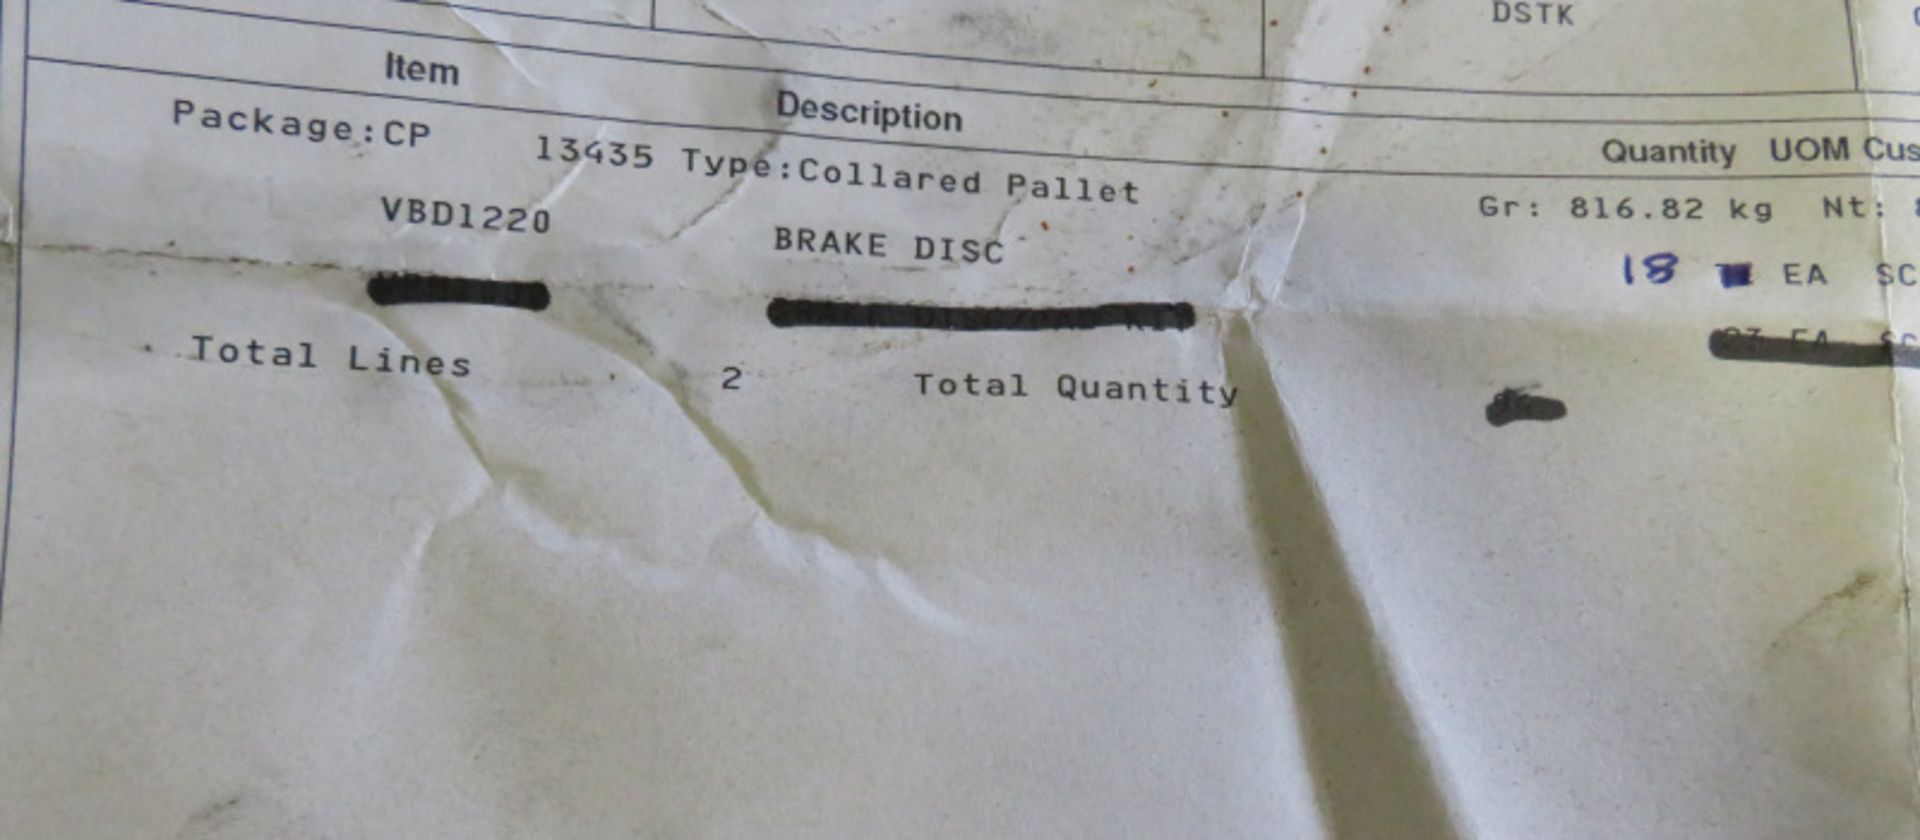 Vehicle parts - brake discs VDB1220 - see picture for itinerary for model numbers and quan - Image 4 of 4